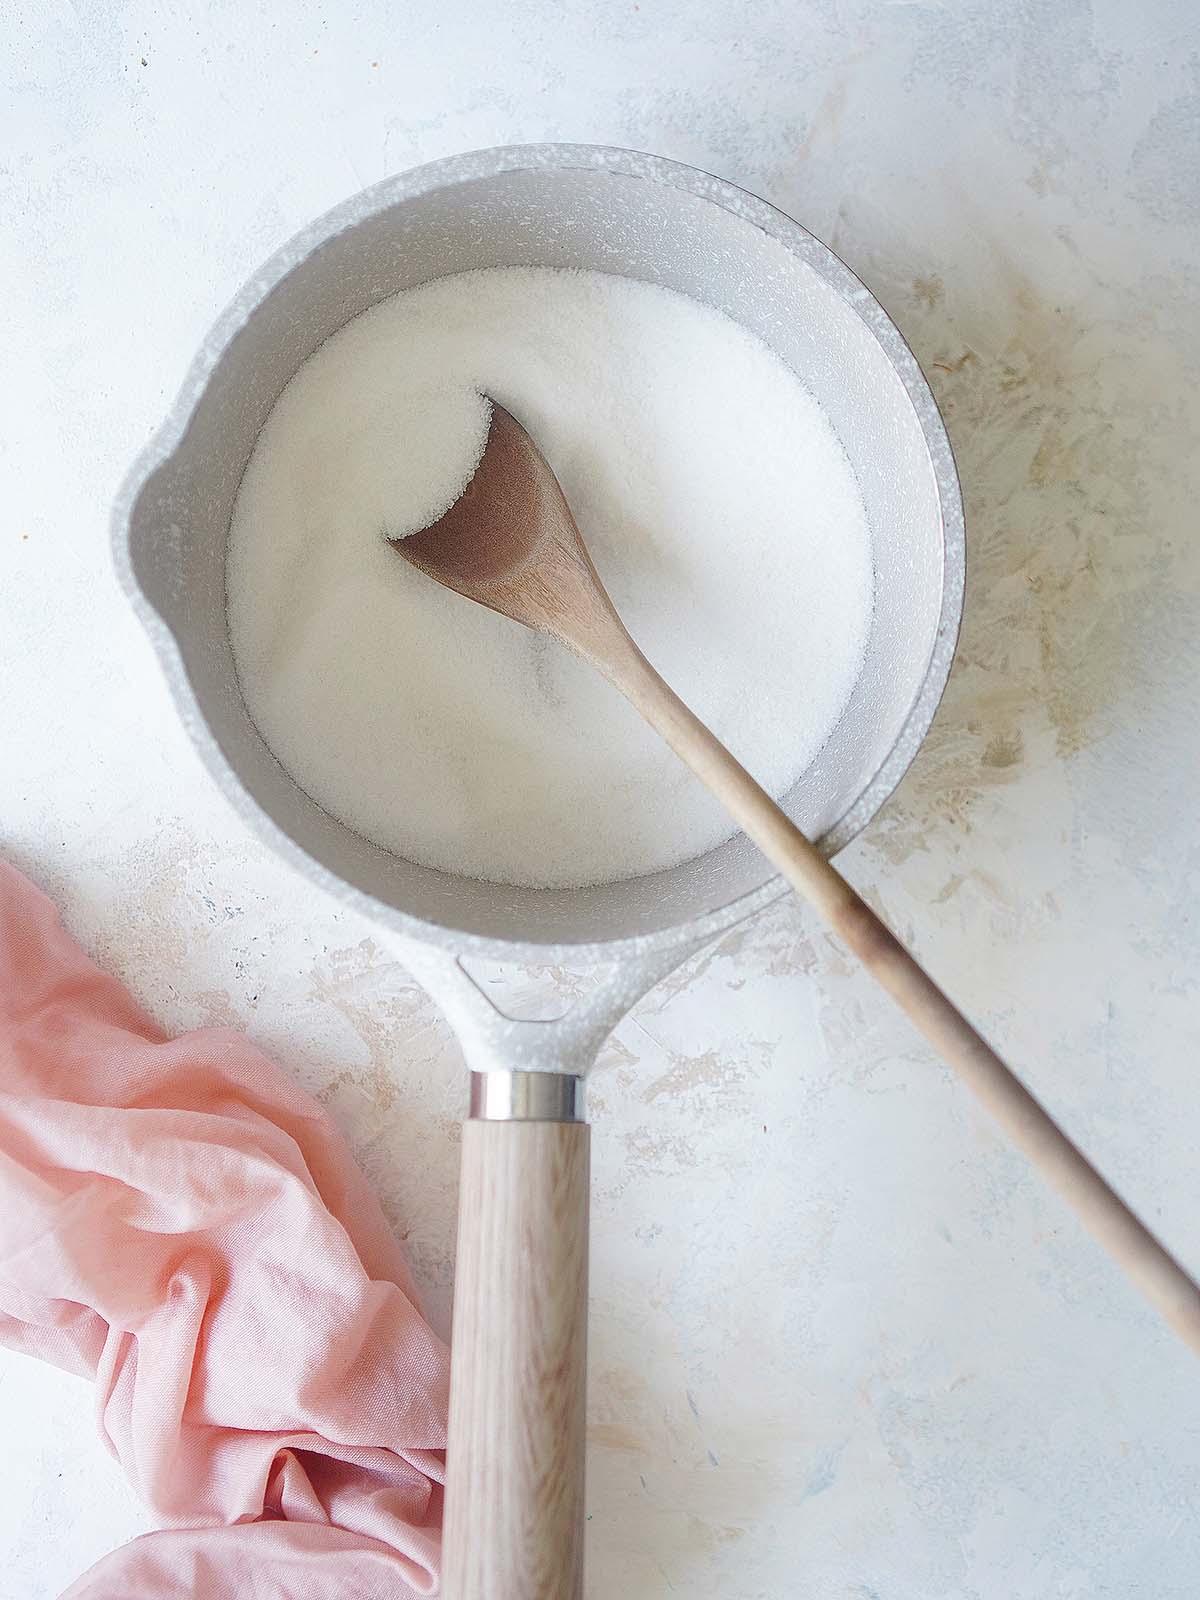 Sugar placed inside a sauce pan and a wooden spoon.